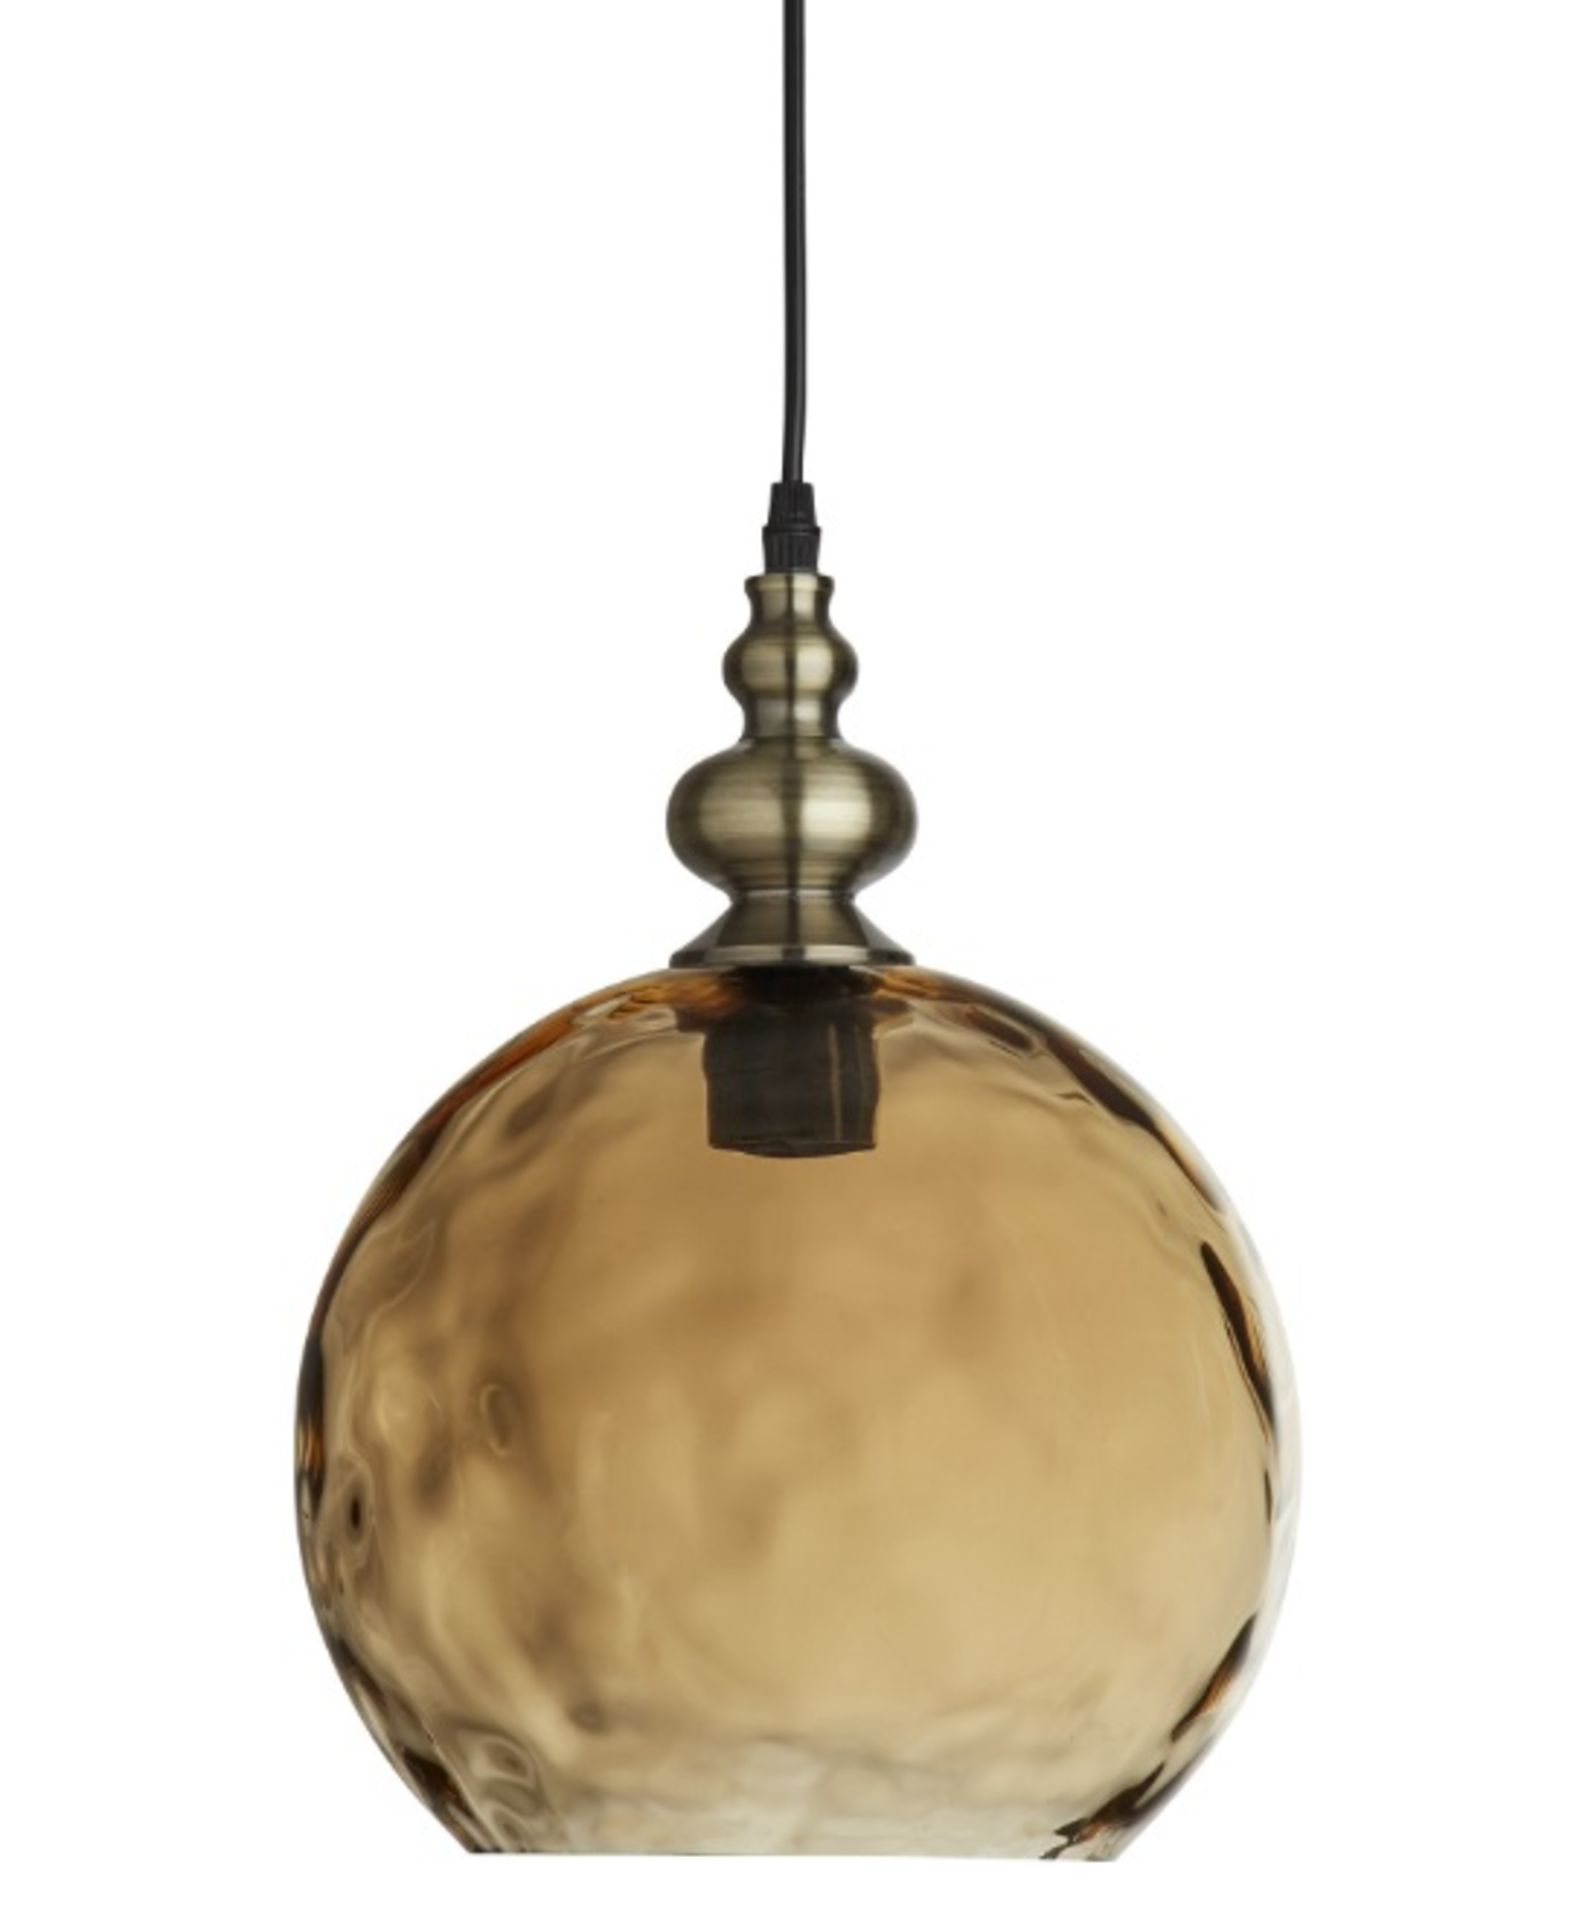 1 x INDIANA Pendant Light With Dimpled Amber Glass Shade - Ex Display Stock - CL298 - Ref J074